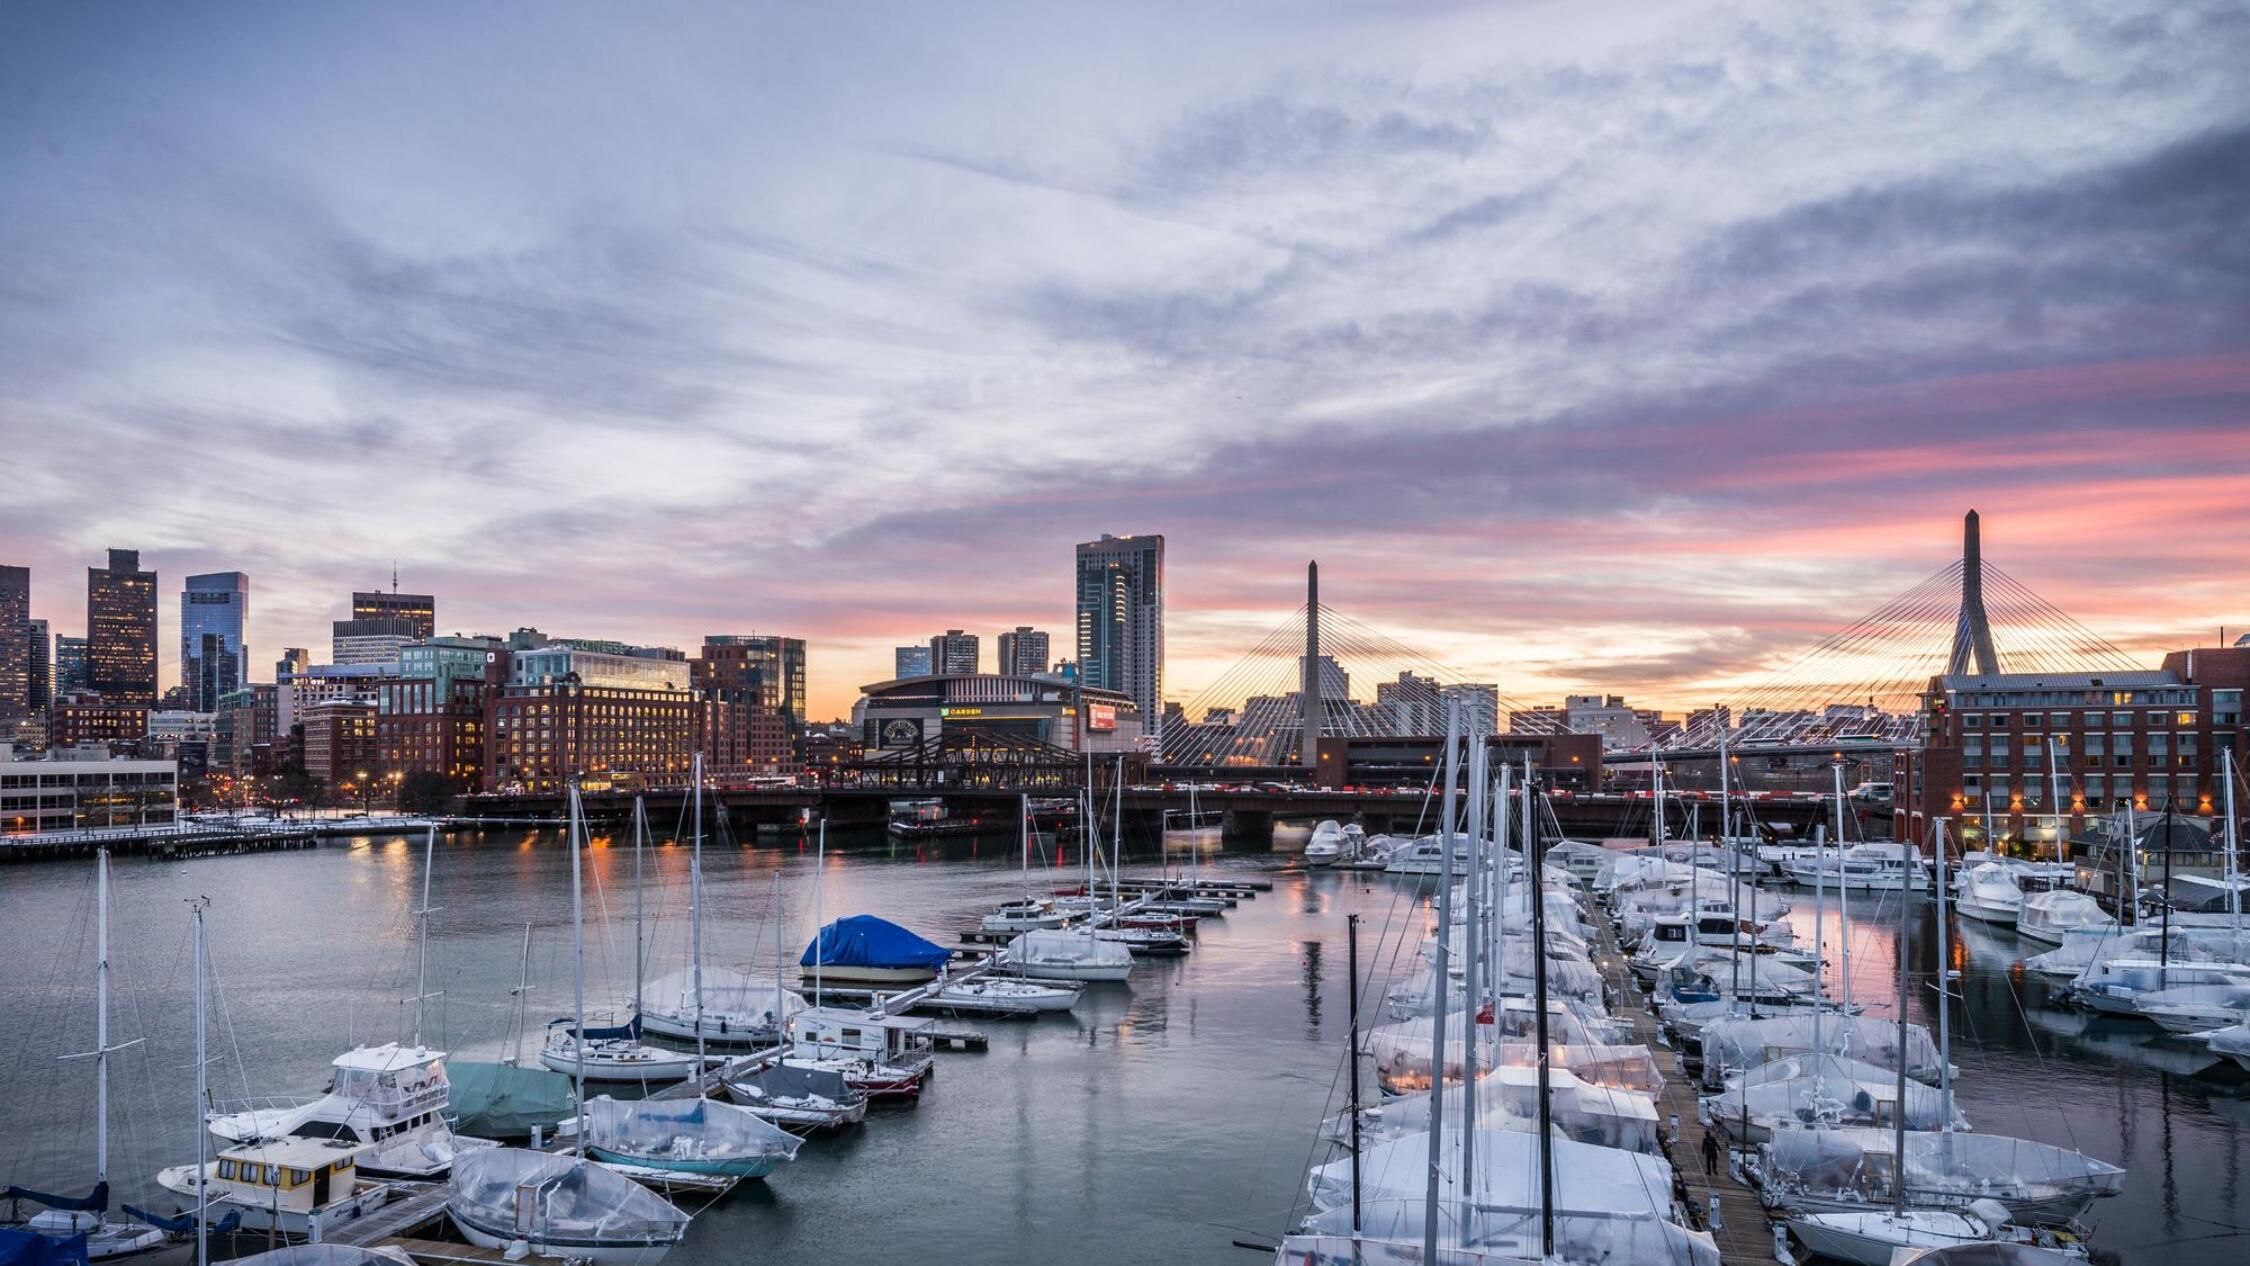 View of moored sailboats at the marina, with the Boston skyline in the background under a beautiful sunset sky